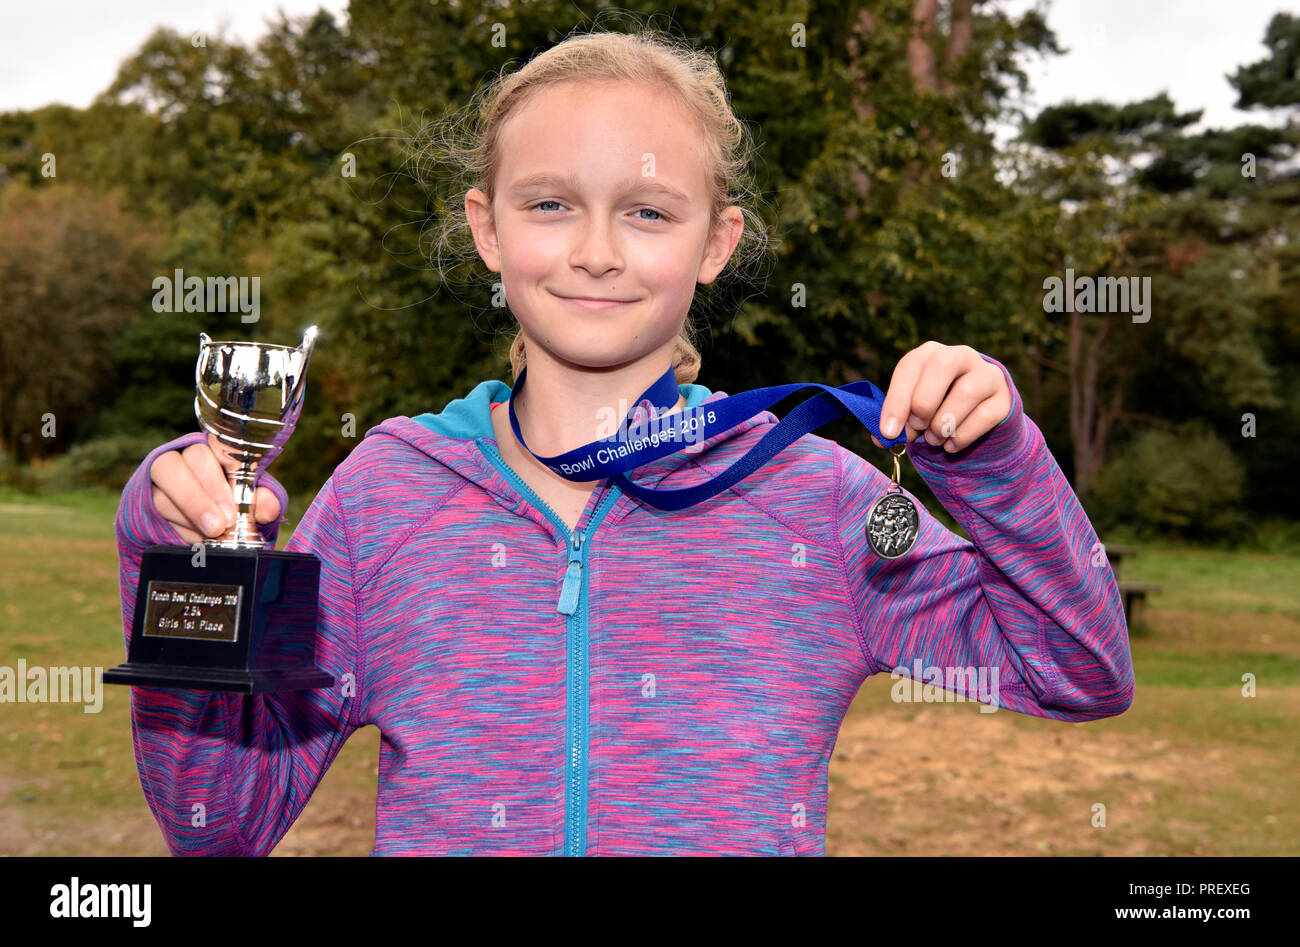 10 year old girl proudly displaying her medal and cup after becoming the first girl to cross the finish line in a 2.5KM cross country running race... Stock Photo